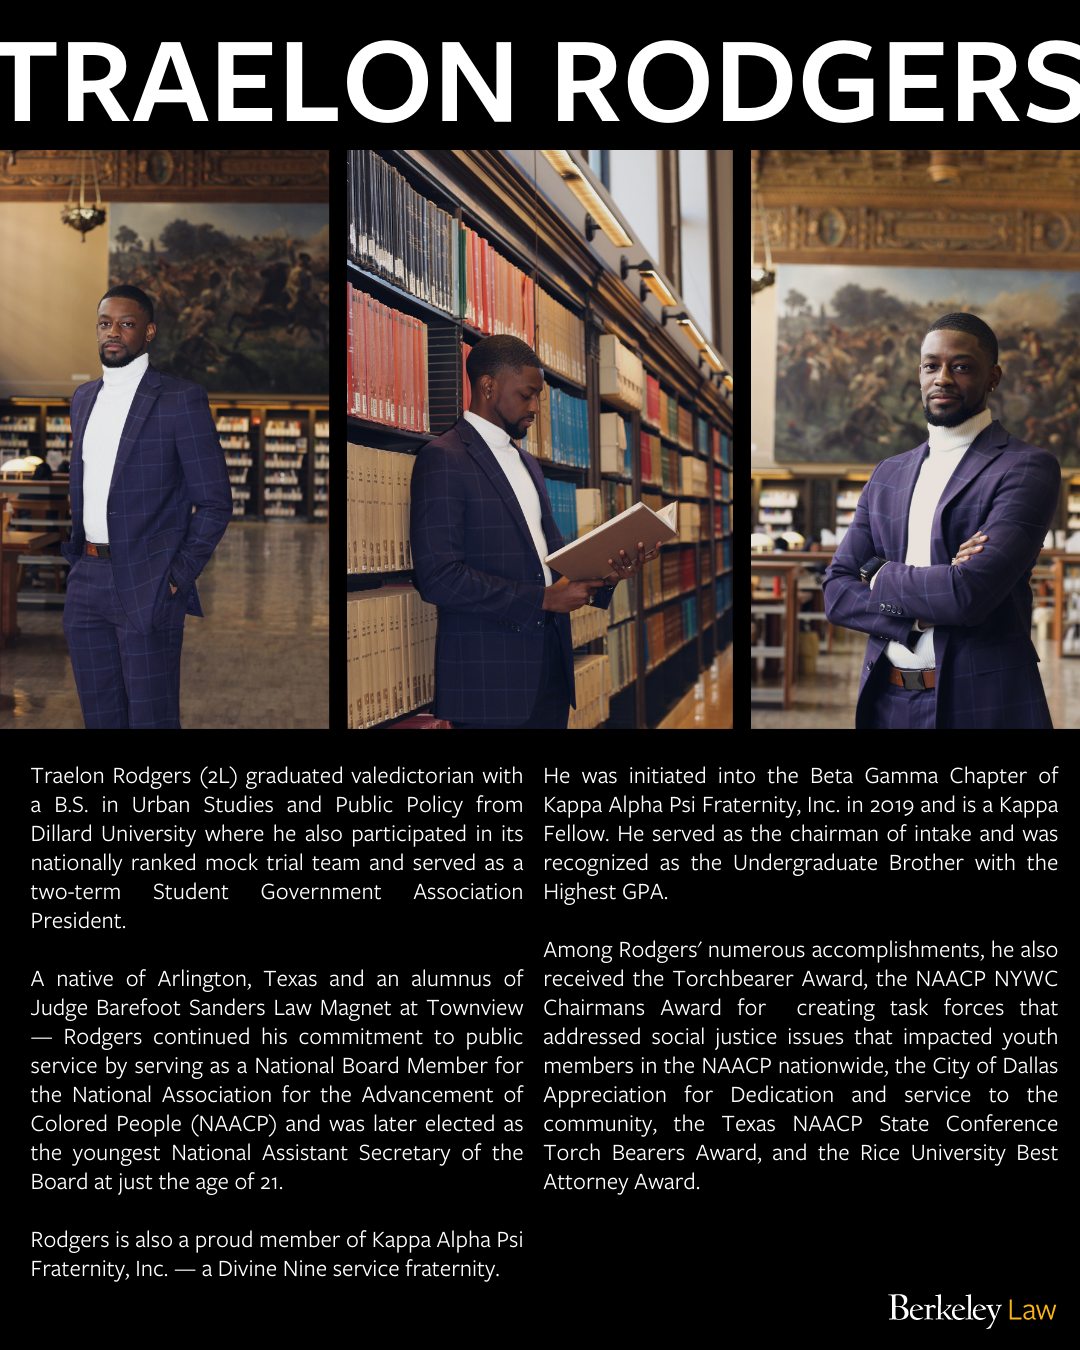 Clicking on the photo will redirect you to an Instagram post of Traelon's feature.
Left photo is Traelon Rodgers standing firmly with his hands in his pockets at the Doe Library. Middle photo is Traelon Rodgers reading a book while leaning against a bookshelf at the Doe Library. Right photo is Traelon Rodgers standing firmly with arms crossed. Text overlaid says: "Traelon Rodgers (2L) graduated valedictorian with a B.S. in Urban Studies and Public Policy from Dillard University where he also participated in its nationally ranked mock trial team and served as a two-term Student Government Association President. A native of Arlington, Texas and an alumnus of Judge Barefoot Sanders Law Magnet at Townview — Rodgers continued his commitment to public service by serving as a National Board Member for the National Association for the Advancement of Colored People (NAACP) and was later elected as the youngest National Assistant Secretary of the Board at just the age of 21. Rodgers is also a proud member of Kappa Alpha Psi Fraternity, Inc. — a Divine Nine service fraternity. He was initiated into the Beta Gamma Chapter of Kappa Alpha Psi Fraternity, Inc. in 2019 and is a Kappa Fellow. He served as the chairman of intake and was recognized as the Undergraduate Brother with the Highest GPA. Among Rodgers' numerous accomplishments, he also received the Torchbearer Award, the NAACP NYWC Chairmans Award for creating task forces that addressed social justice issues that impacted youth members in the NAACP nationwide, the City of Dallas Appreciation for Dedication and service to the community, the Texas NAACP State Conference Torch Bearers Award, and the Rice University Best Attorney Award."